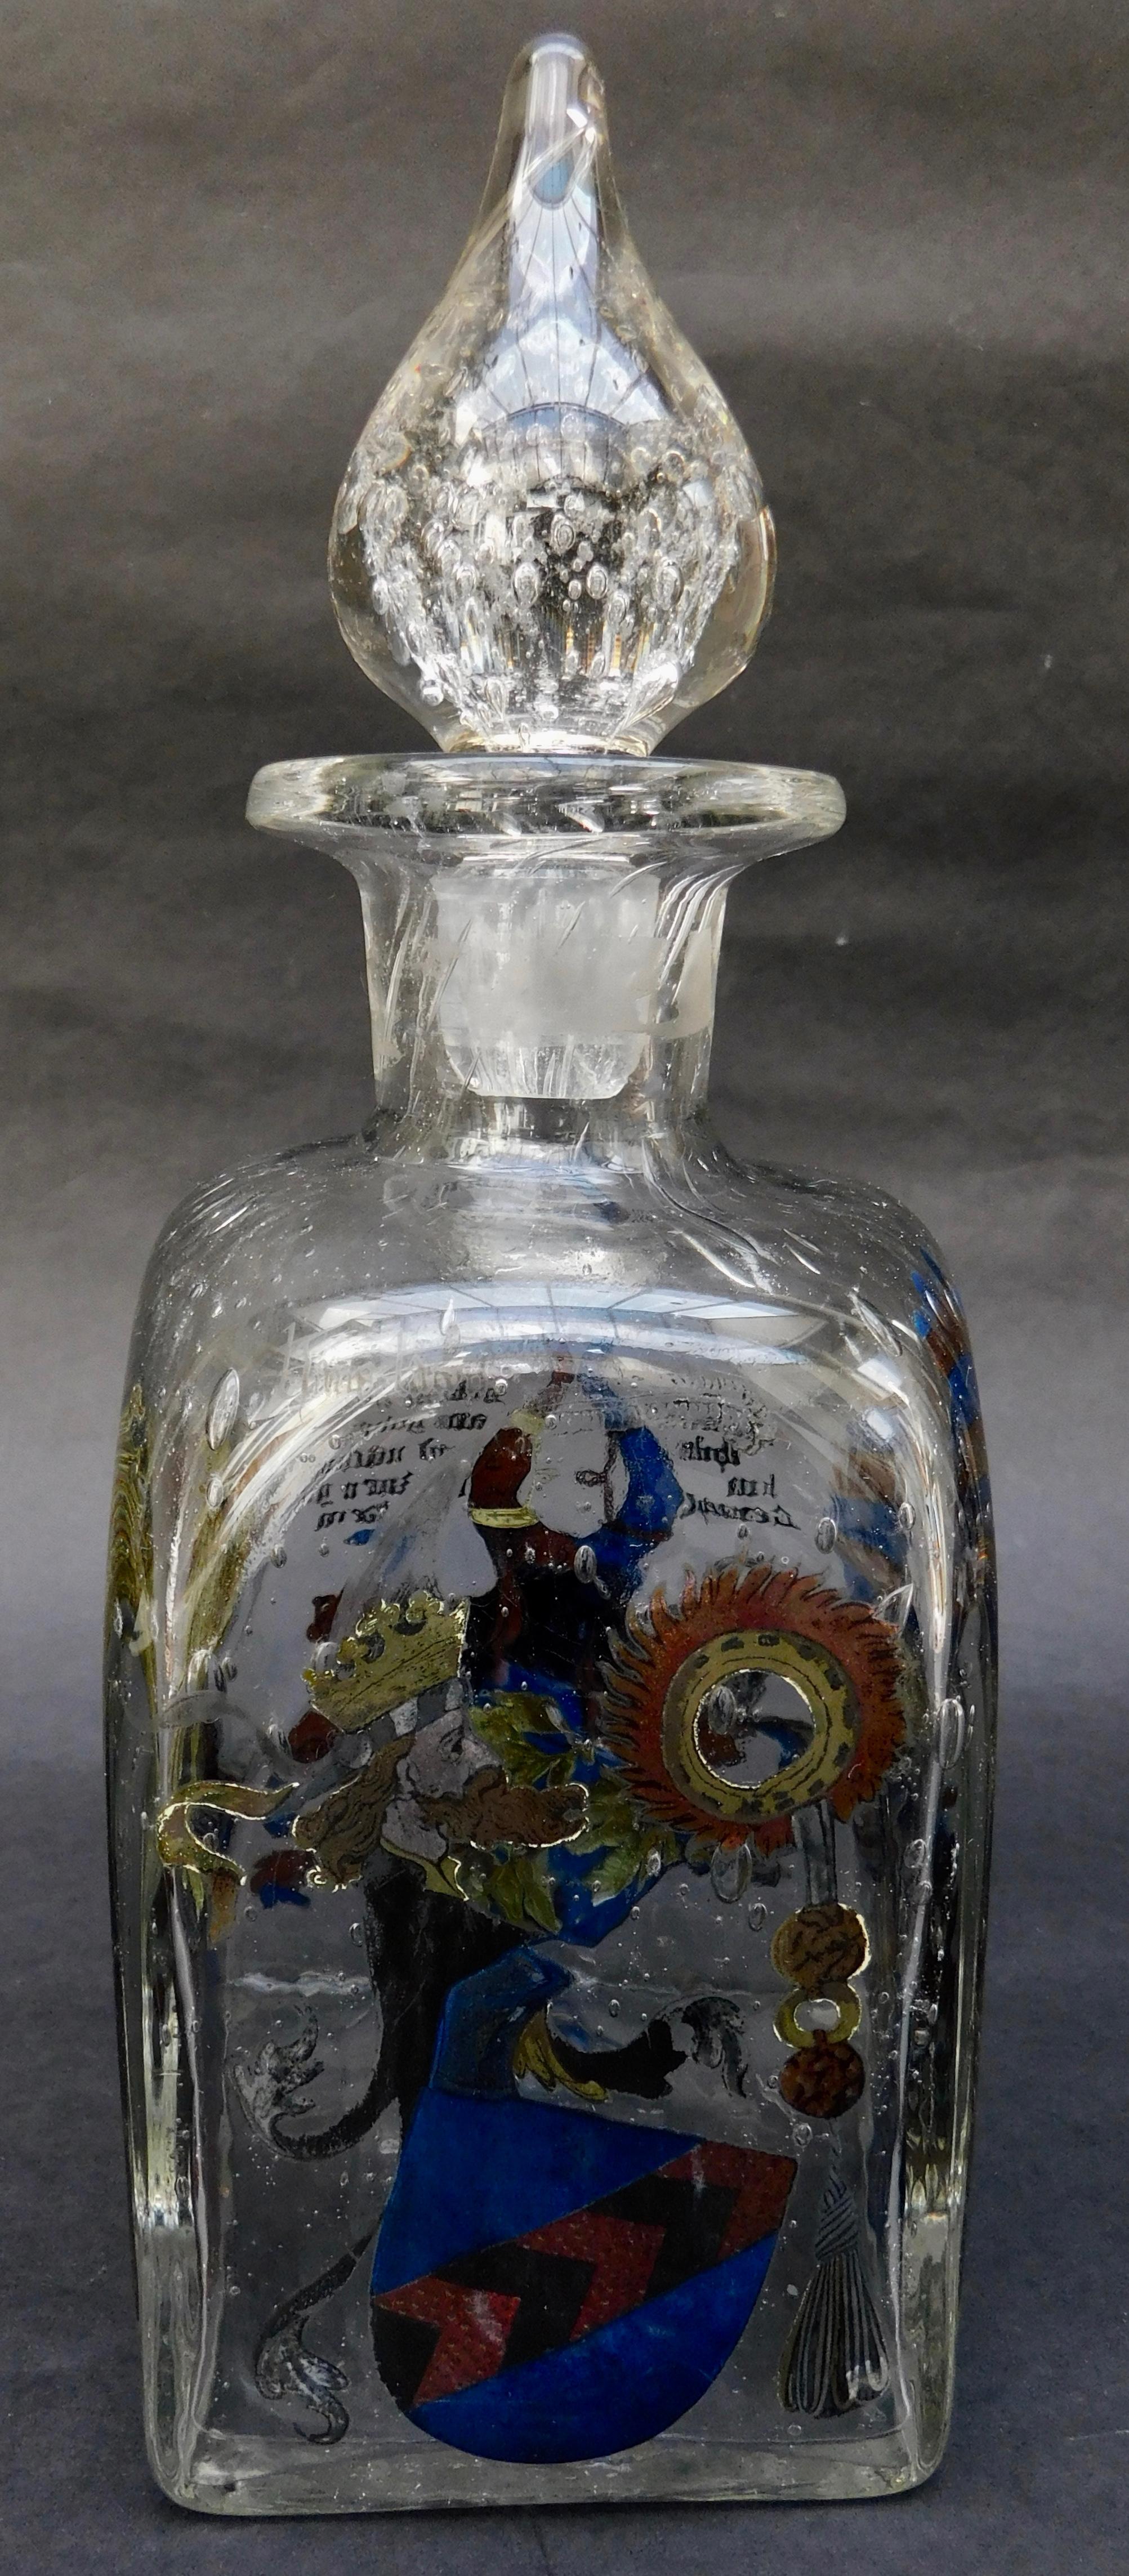 Vintage handblown continental glass decanter with painted enamel heraldic arms decorations. Each side has a different decoration, circa 1920.